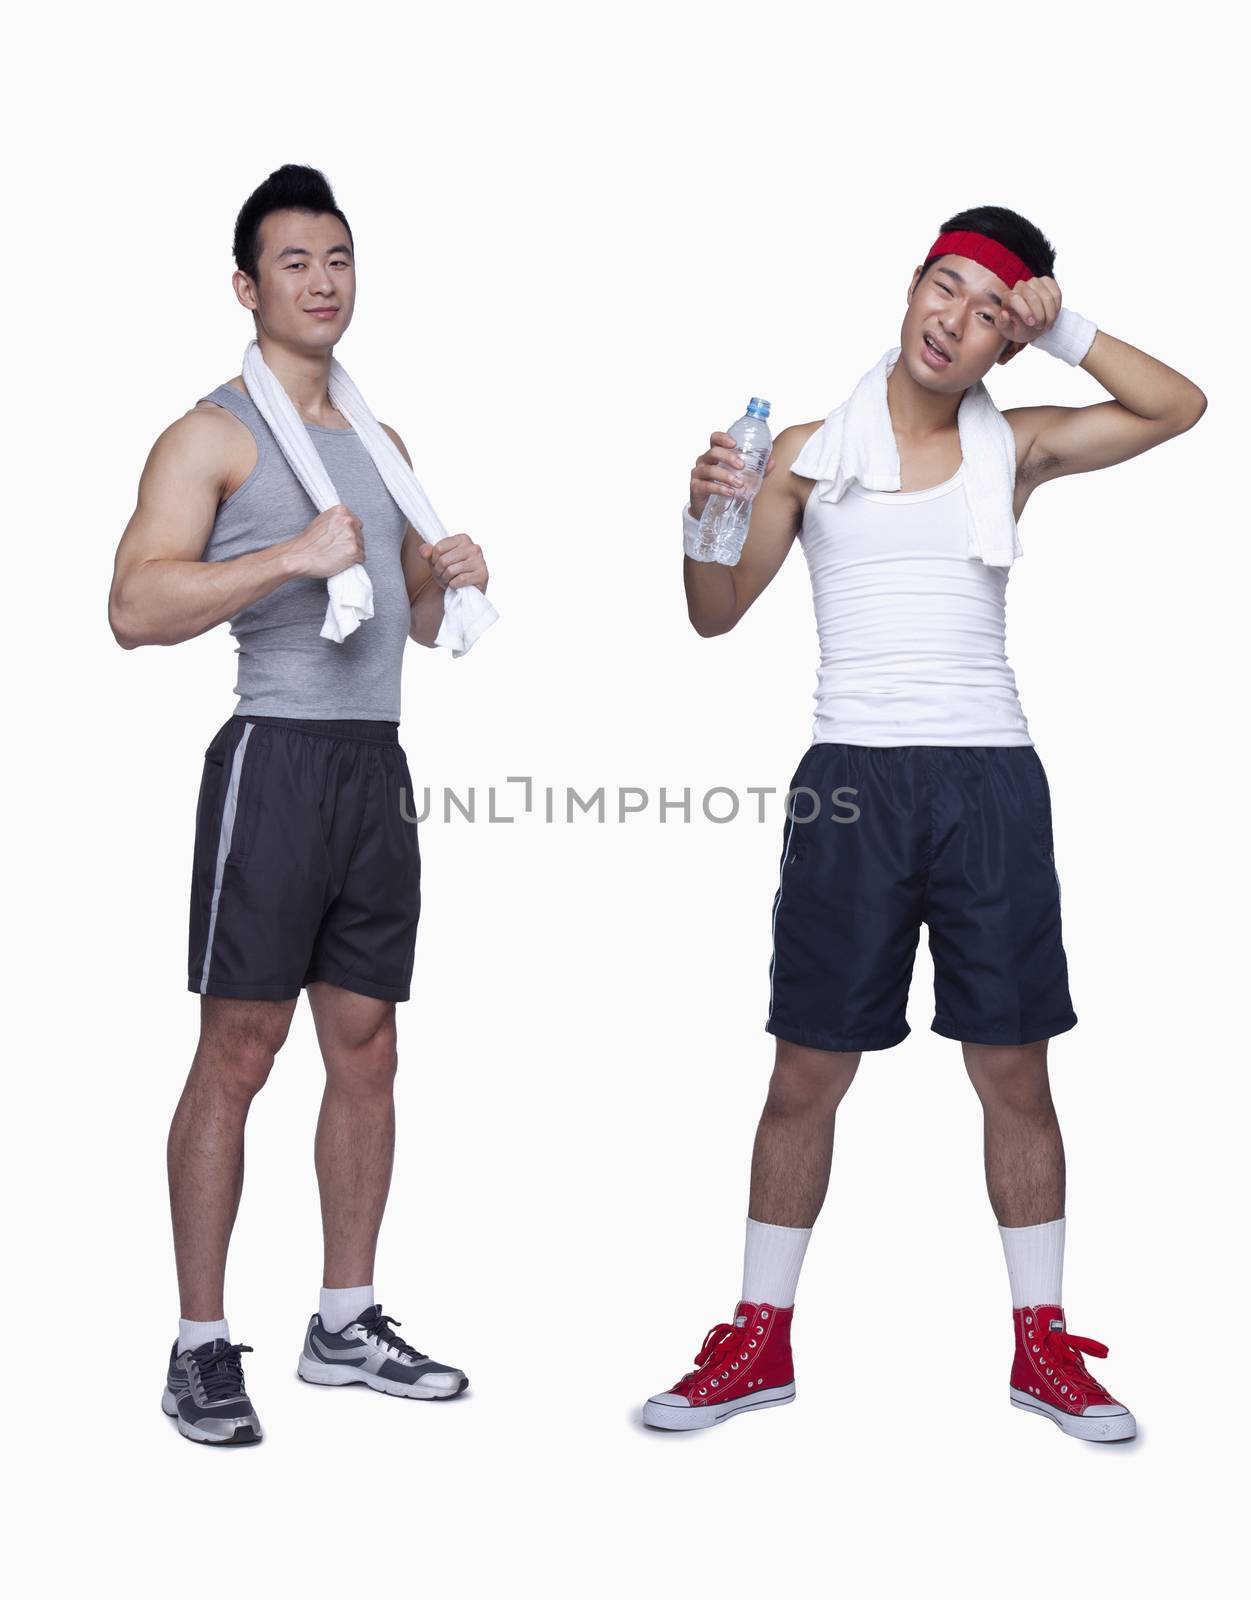 athletic man and workout beginner